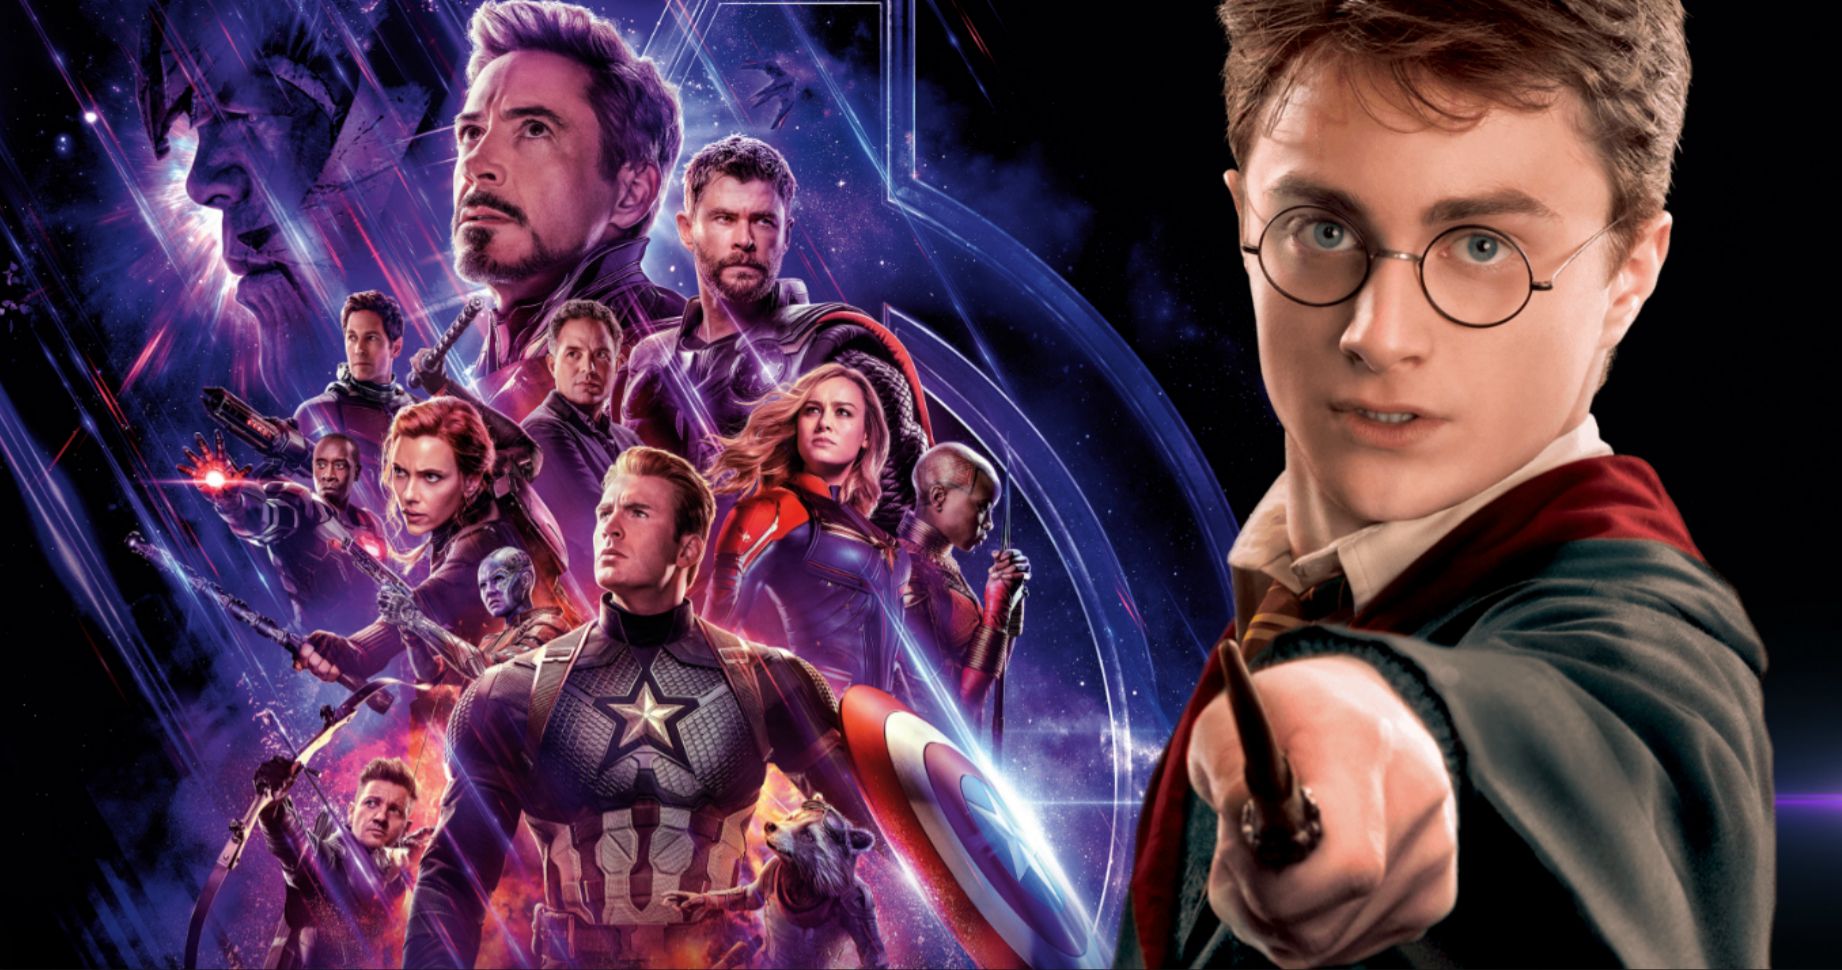 How the MCU Finds Guidance in the Harry Potter Franchise According to Kevin Feige